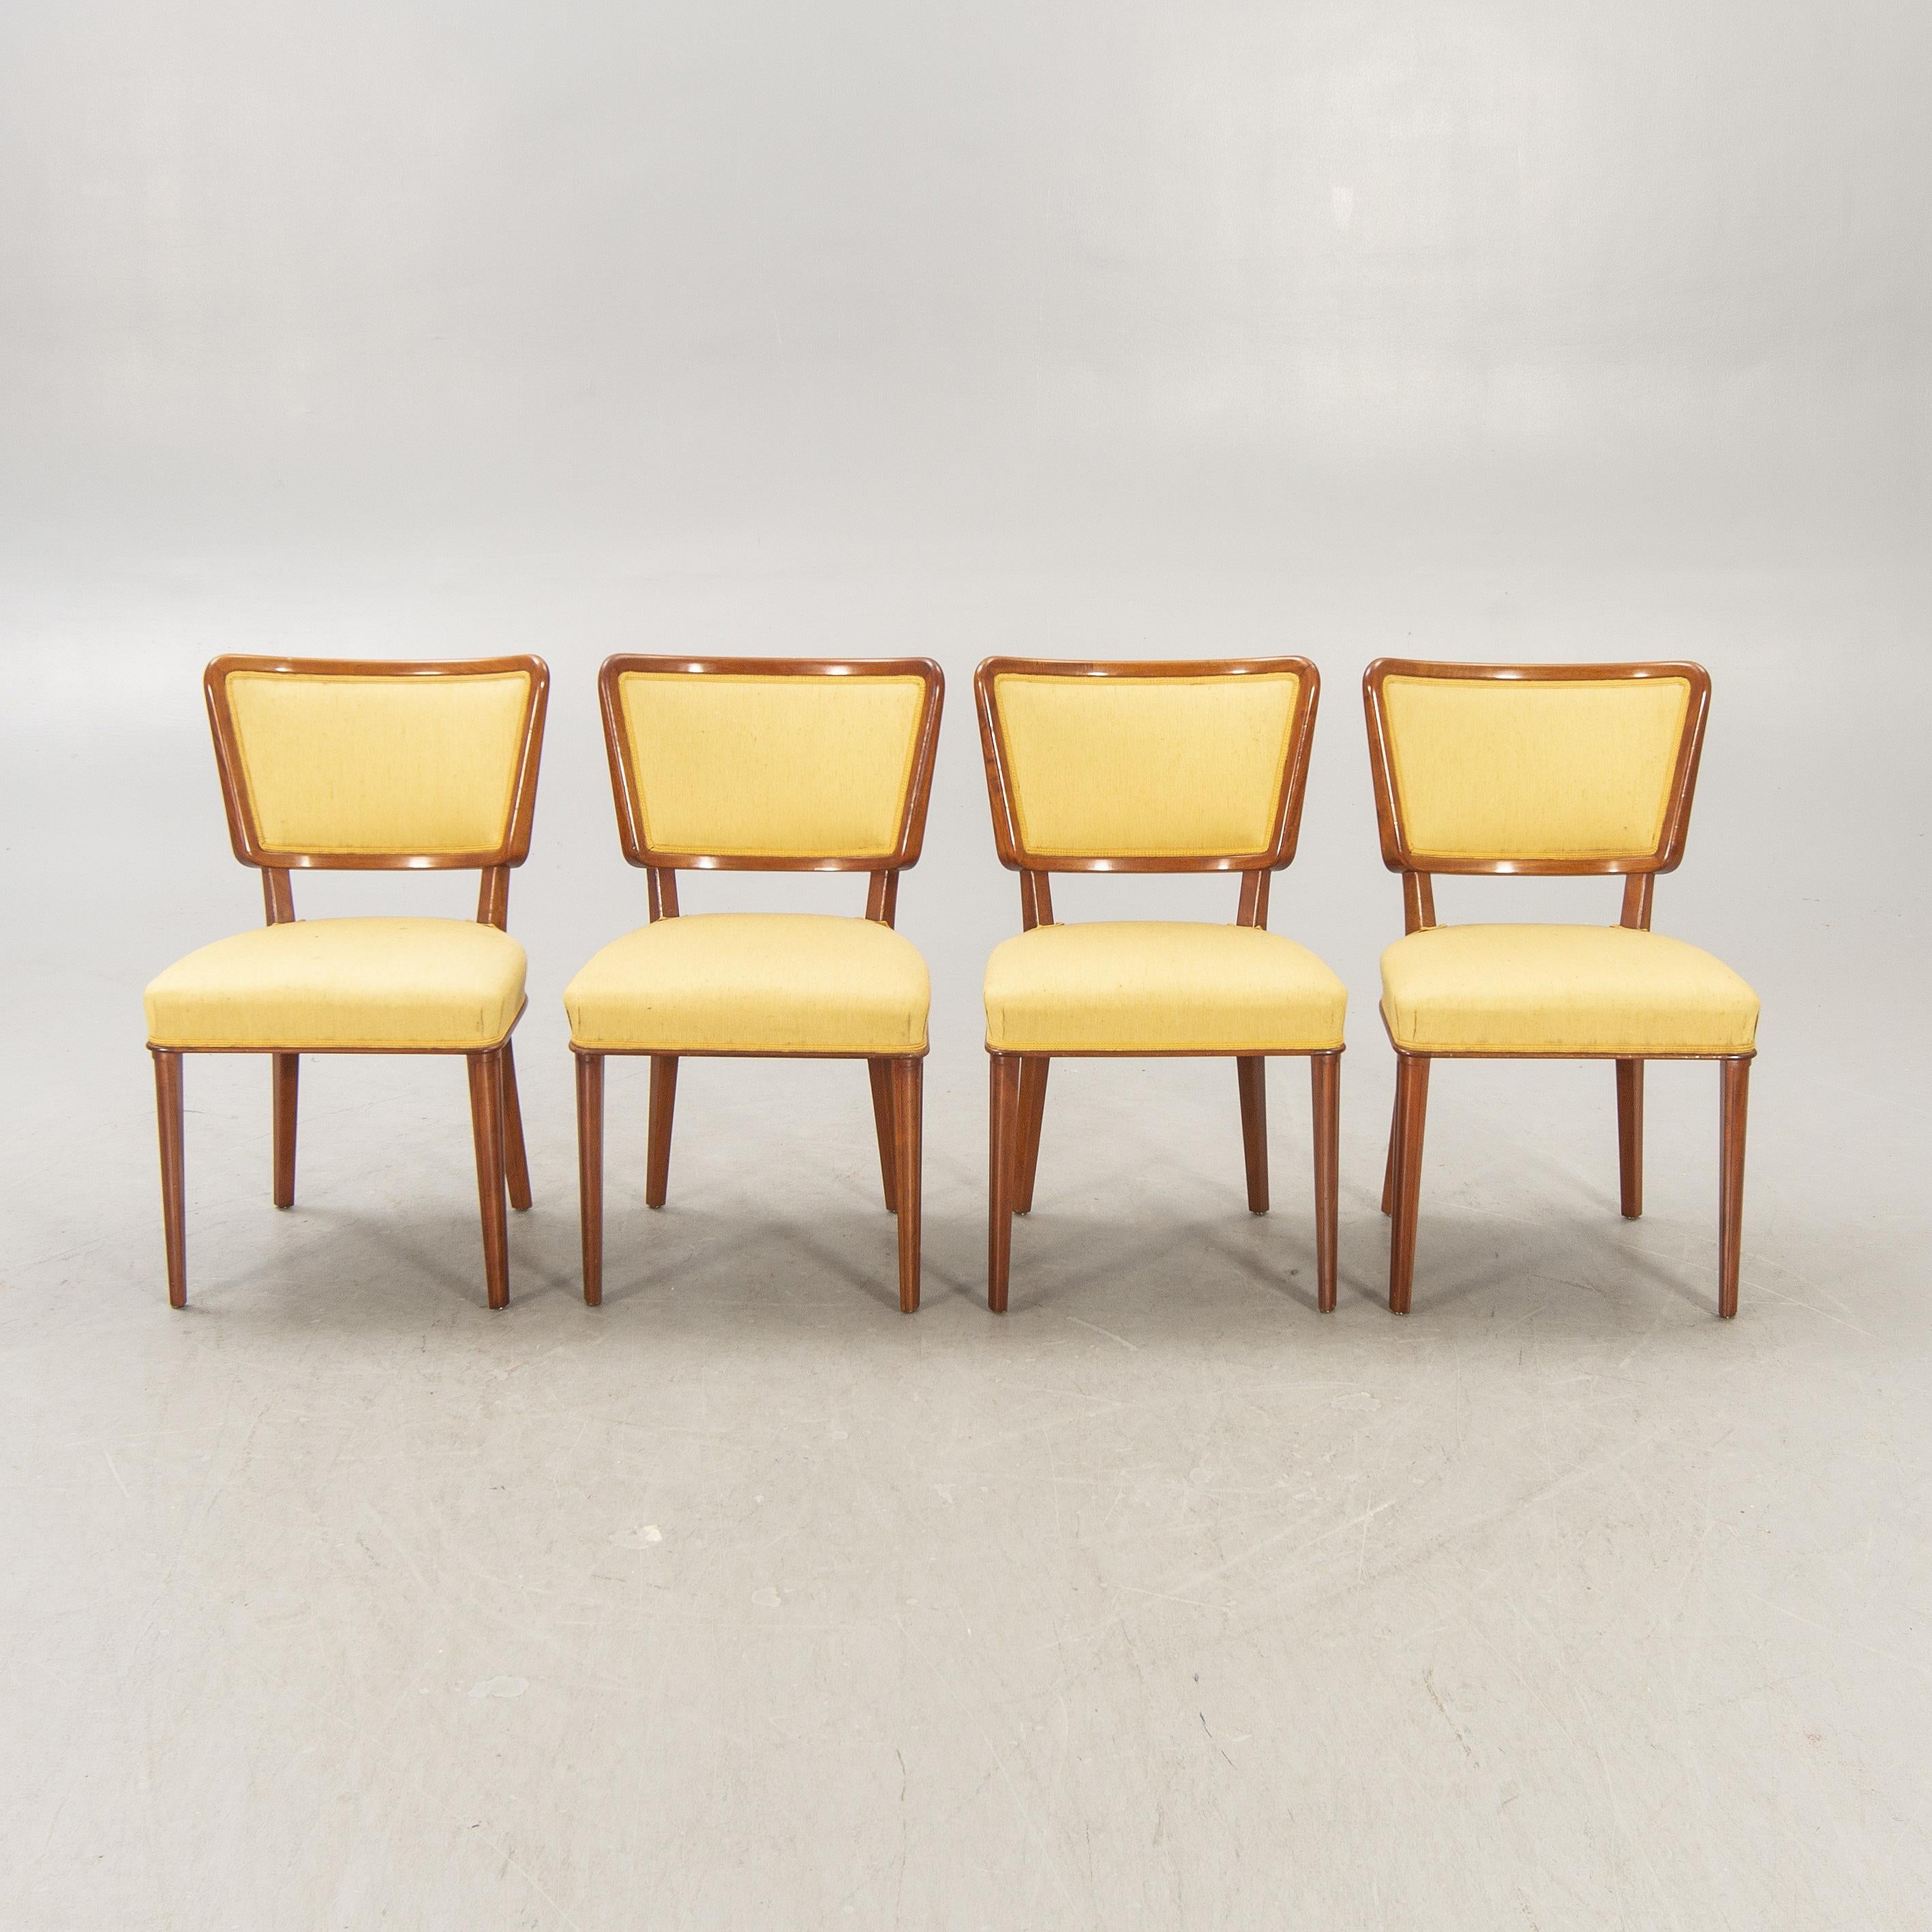 For Claire - Set of Four Swedish Modern Dining Chairs, Sweden, 1950s

The work of Swedish Modern designers and cabinetmakers - like this set of dining chairs - remains disarmingly fresh over 80 years after their creation, mixing both Art Deco and